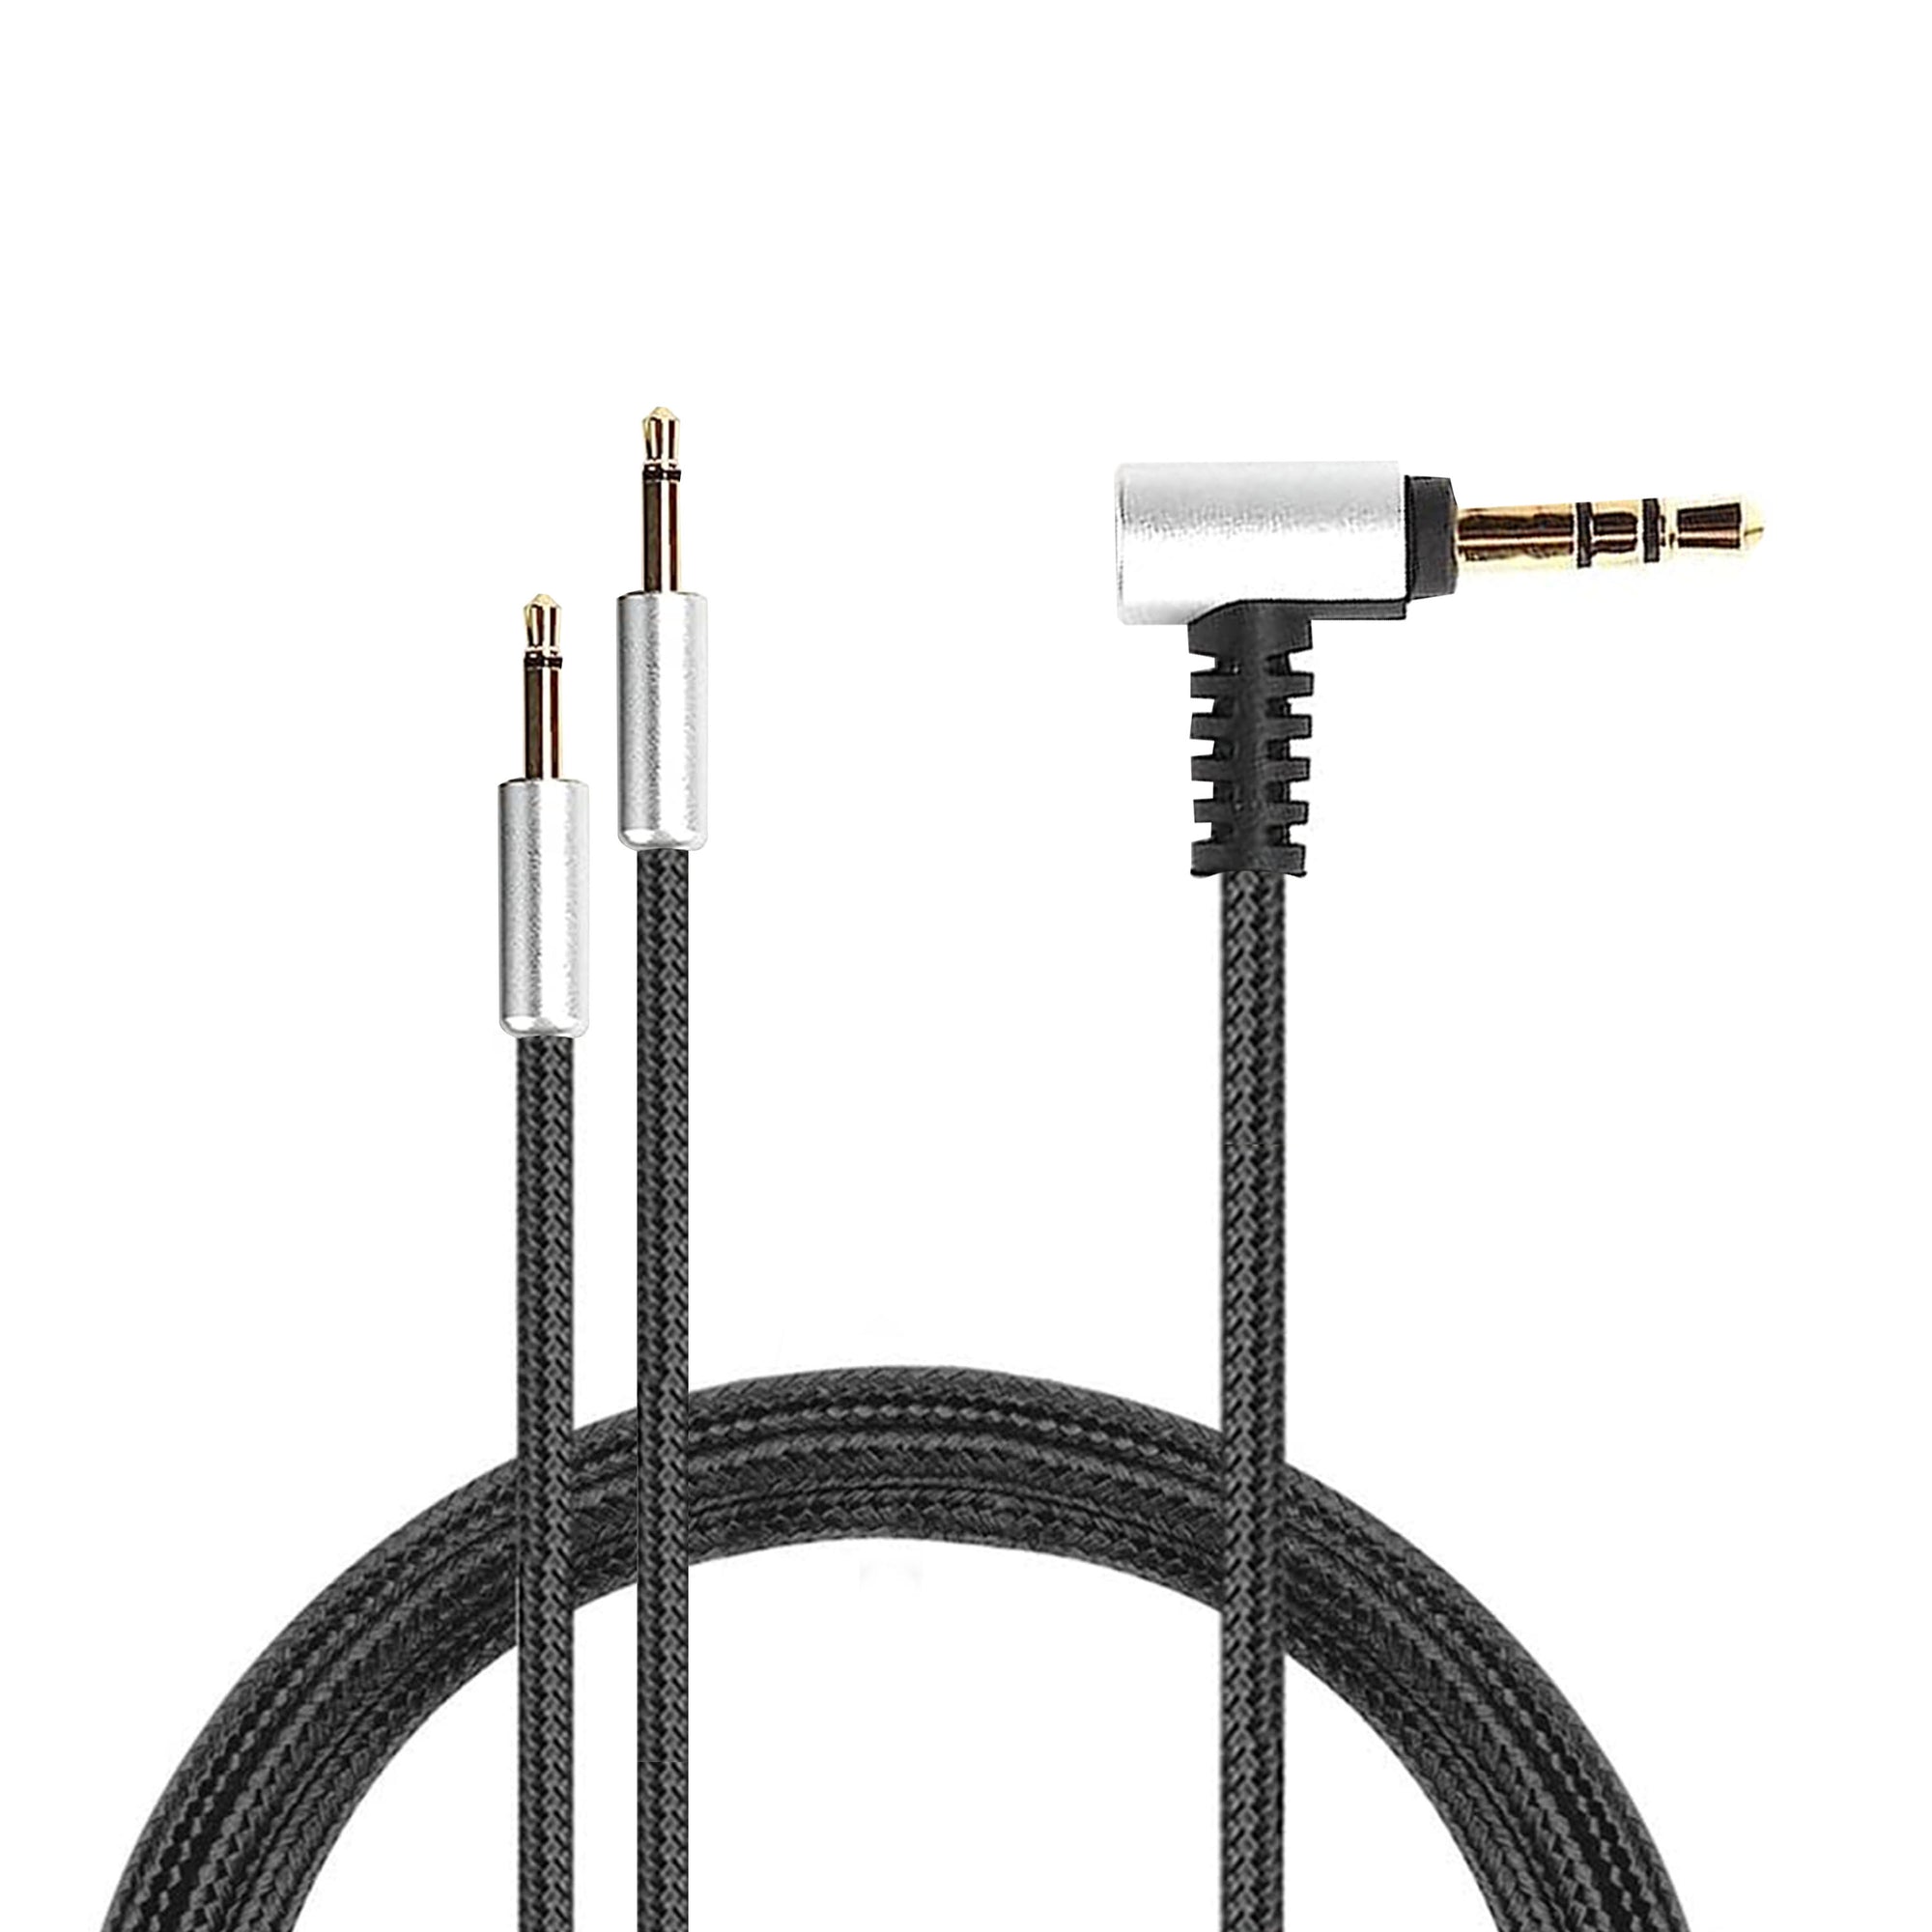 Replacement Cable for Hifiman HE400S, HE-400I (2.5mm plug version), HE560, HE-350, HE1000, HE1000V2 + Sennheiser HD202 & HD212 Headsets, 3.5mm to Dual 2.5mm - 1.2M / 47”